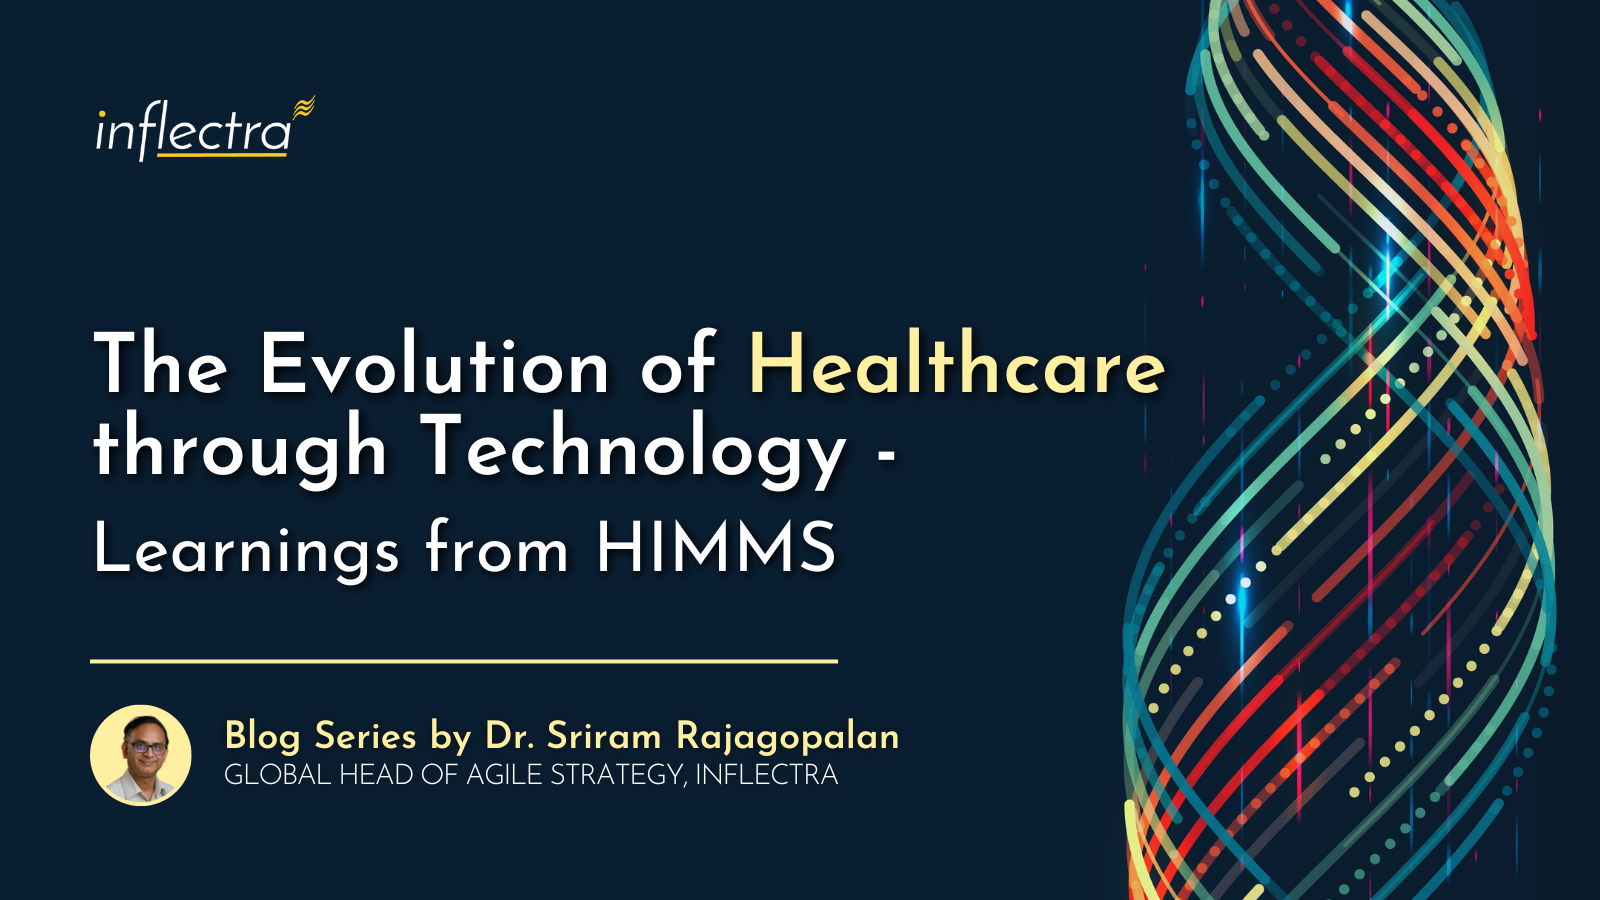 A slide titled “The Evolution of Healthcare Through Technology - Learnings from HIMSS" by Dr. Sriram Rajagopalan, Global Head of Agile Strategy at Inflectra.